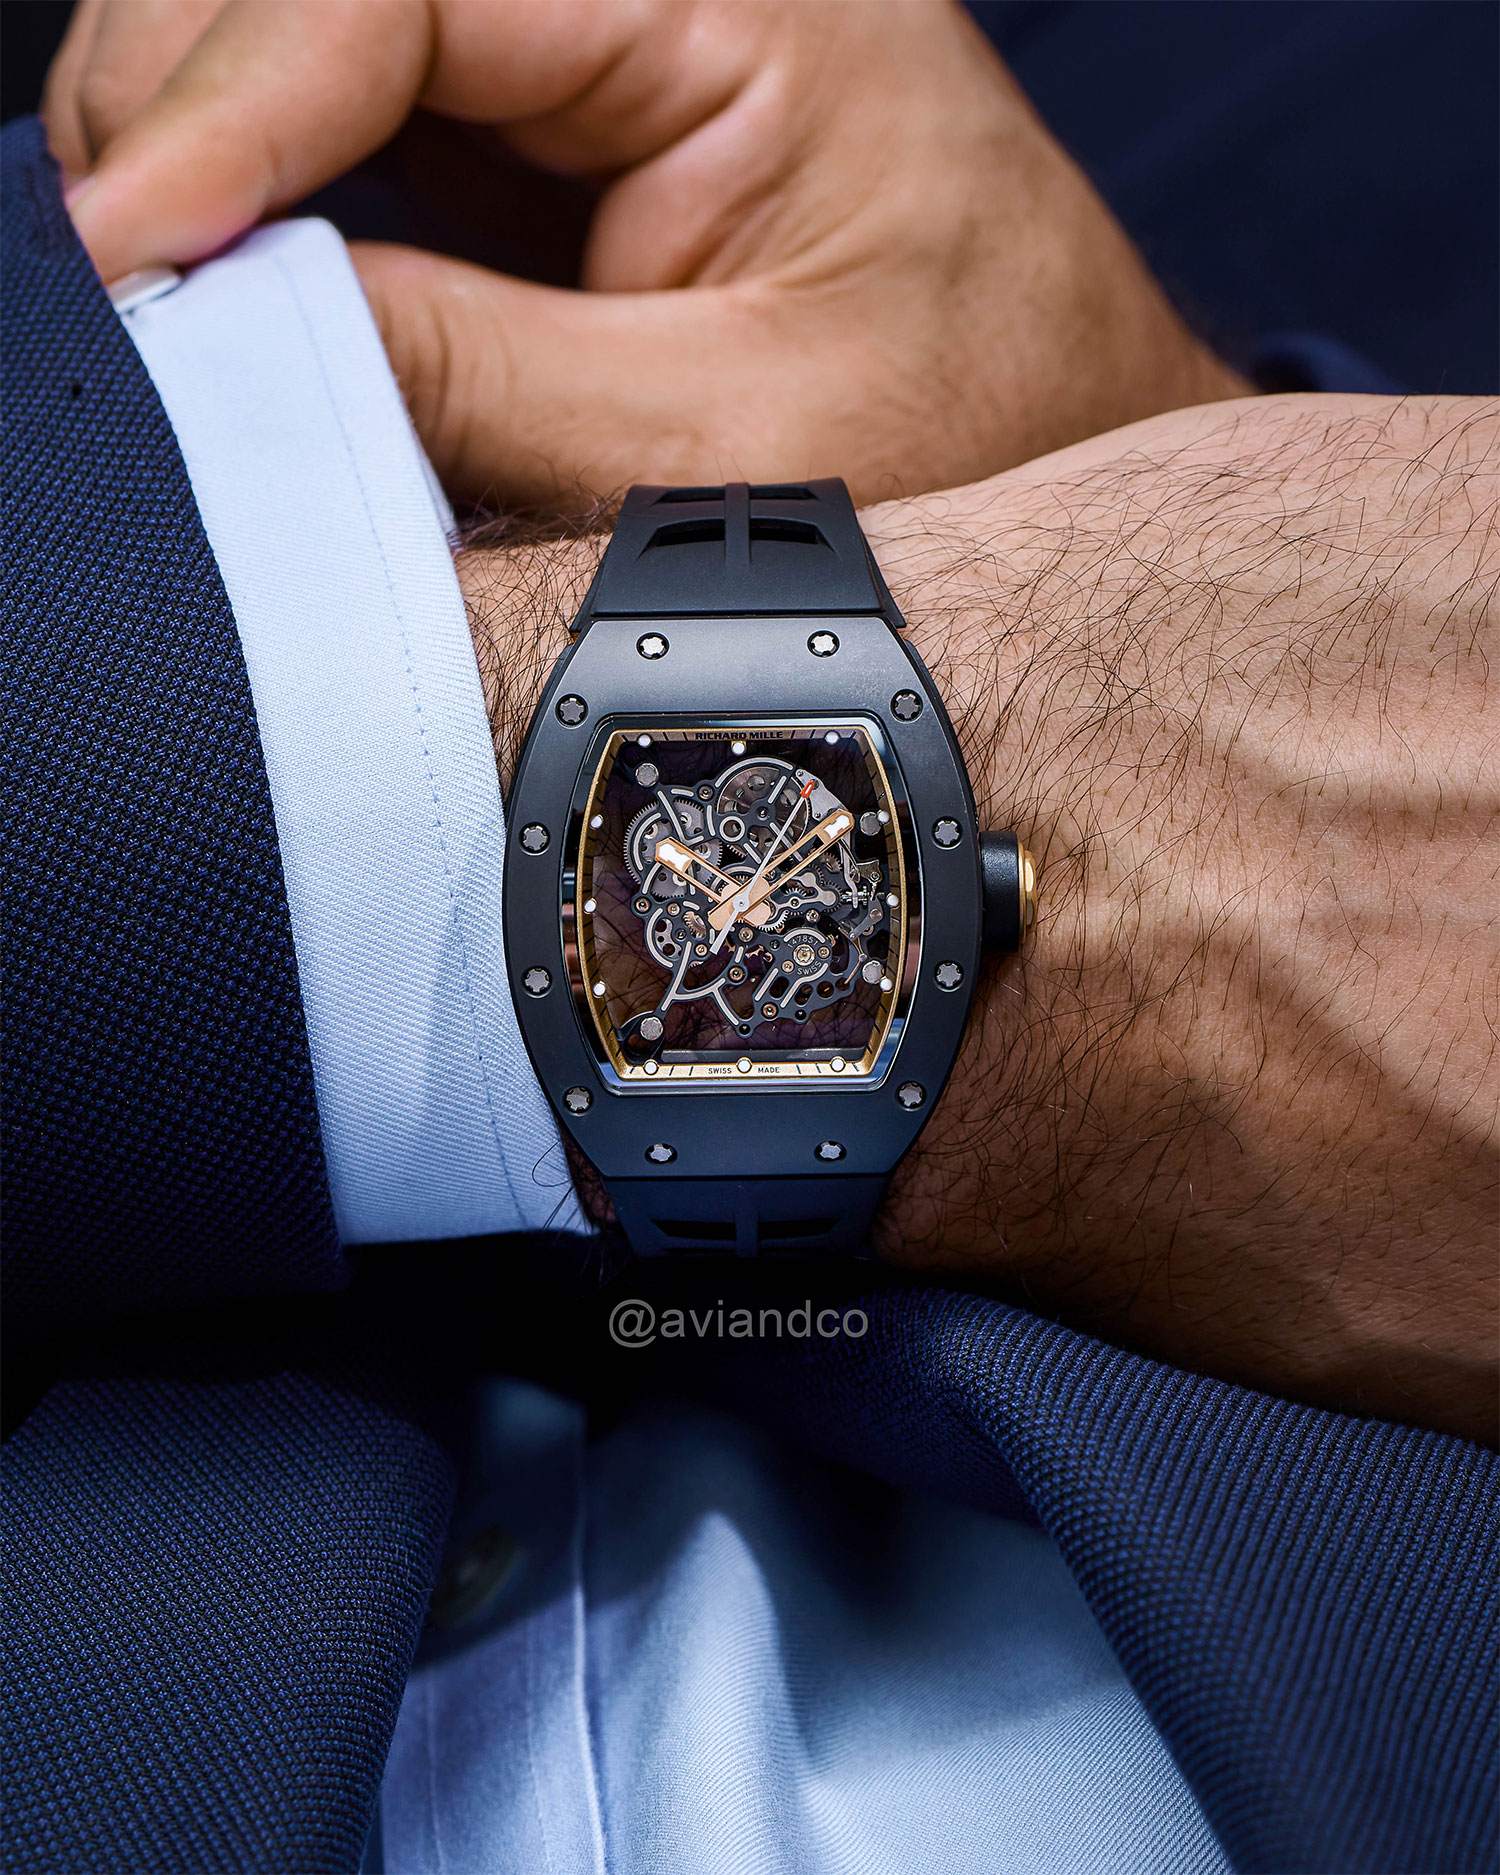 42 mm Asia Edition Richard Mille Timepiece with Transparent Dial, Titanium Case, and Fixed Ceramic Bezel Displayed on a Man’s Wrist.